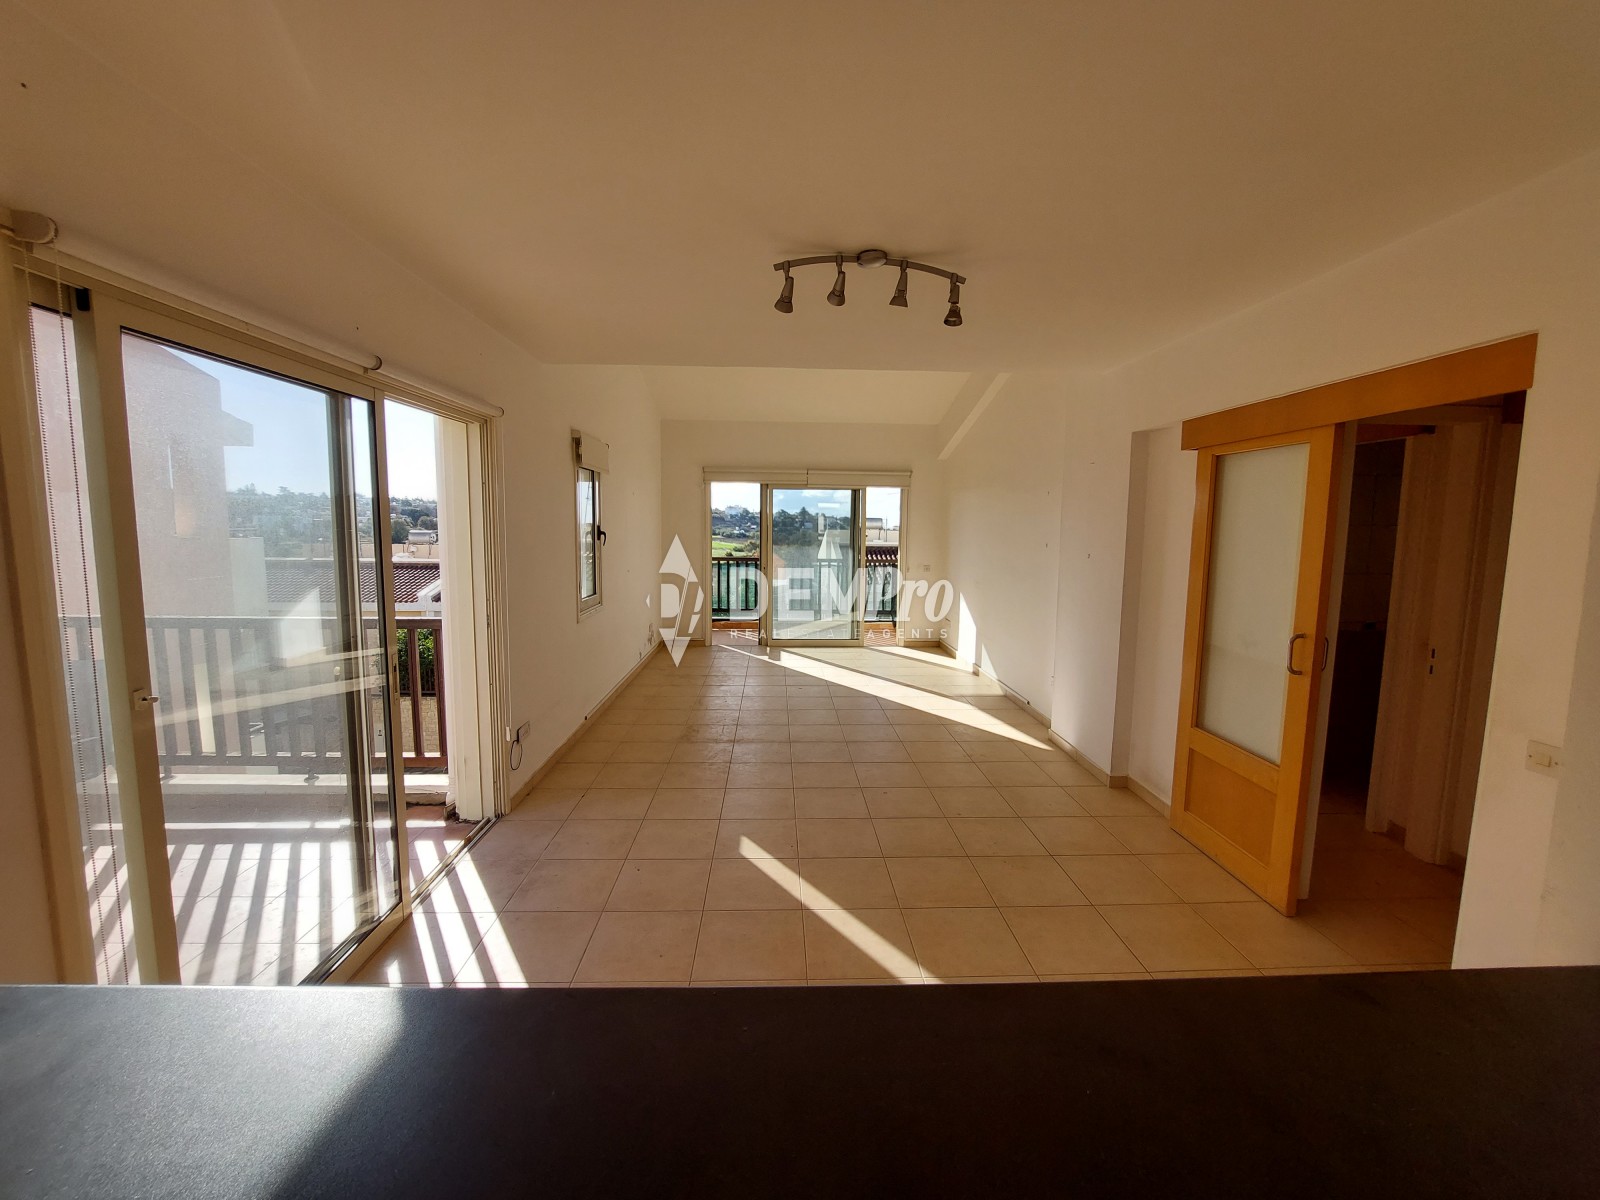 Apartment For Sale in Chloraka, Paphos - DP3451